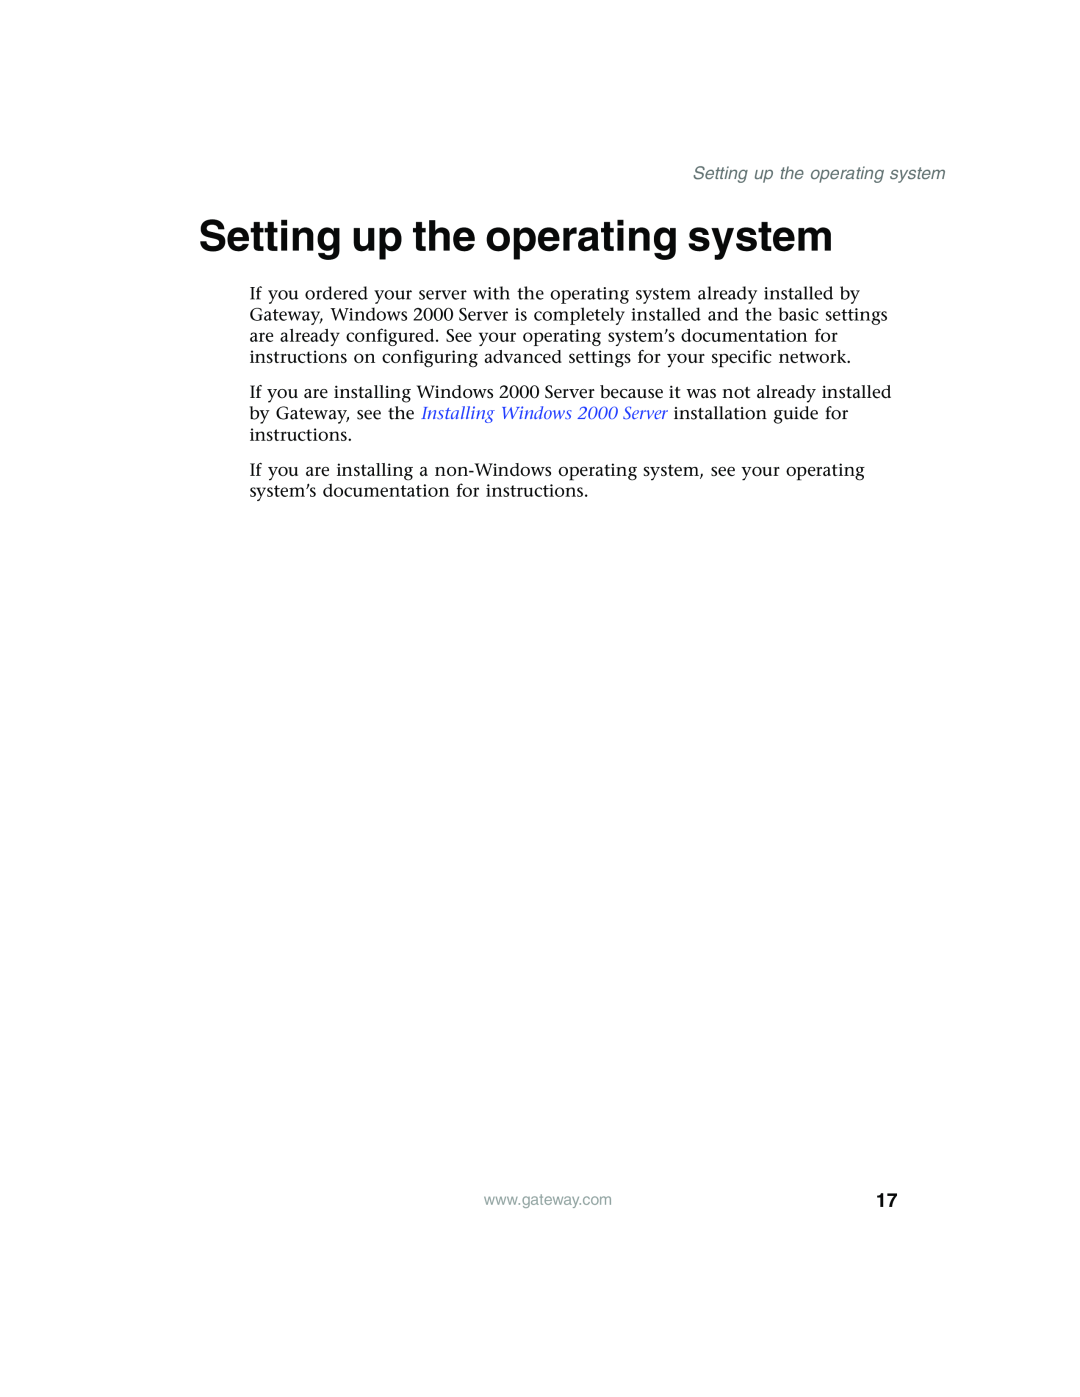 Gateway 960 manual Setting up the operating system 